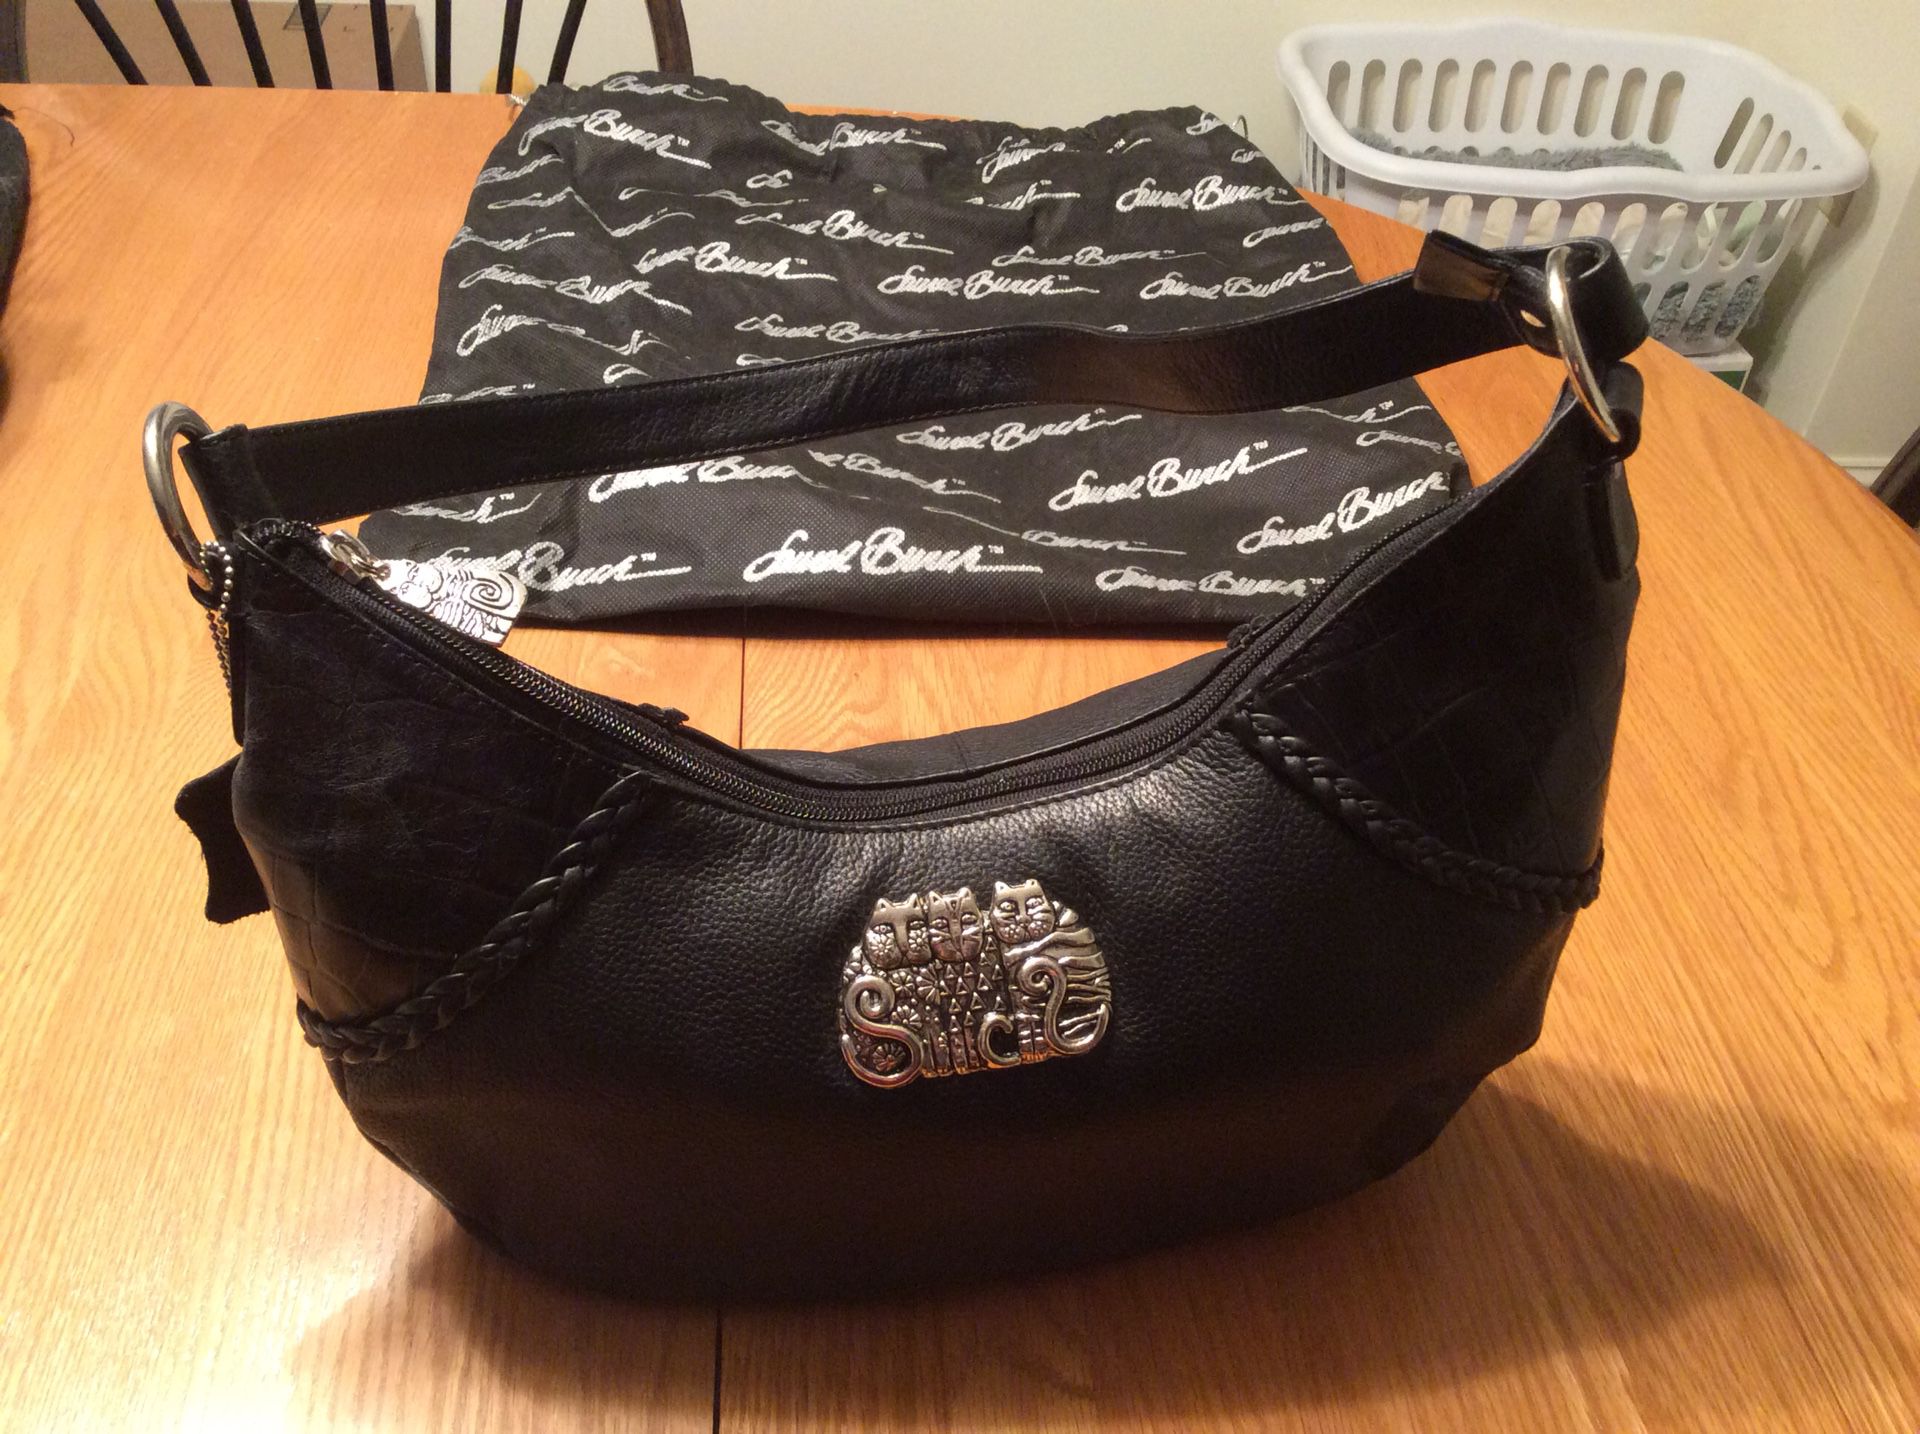 Laurel Burch black leather hobo purse with silver cats emblem